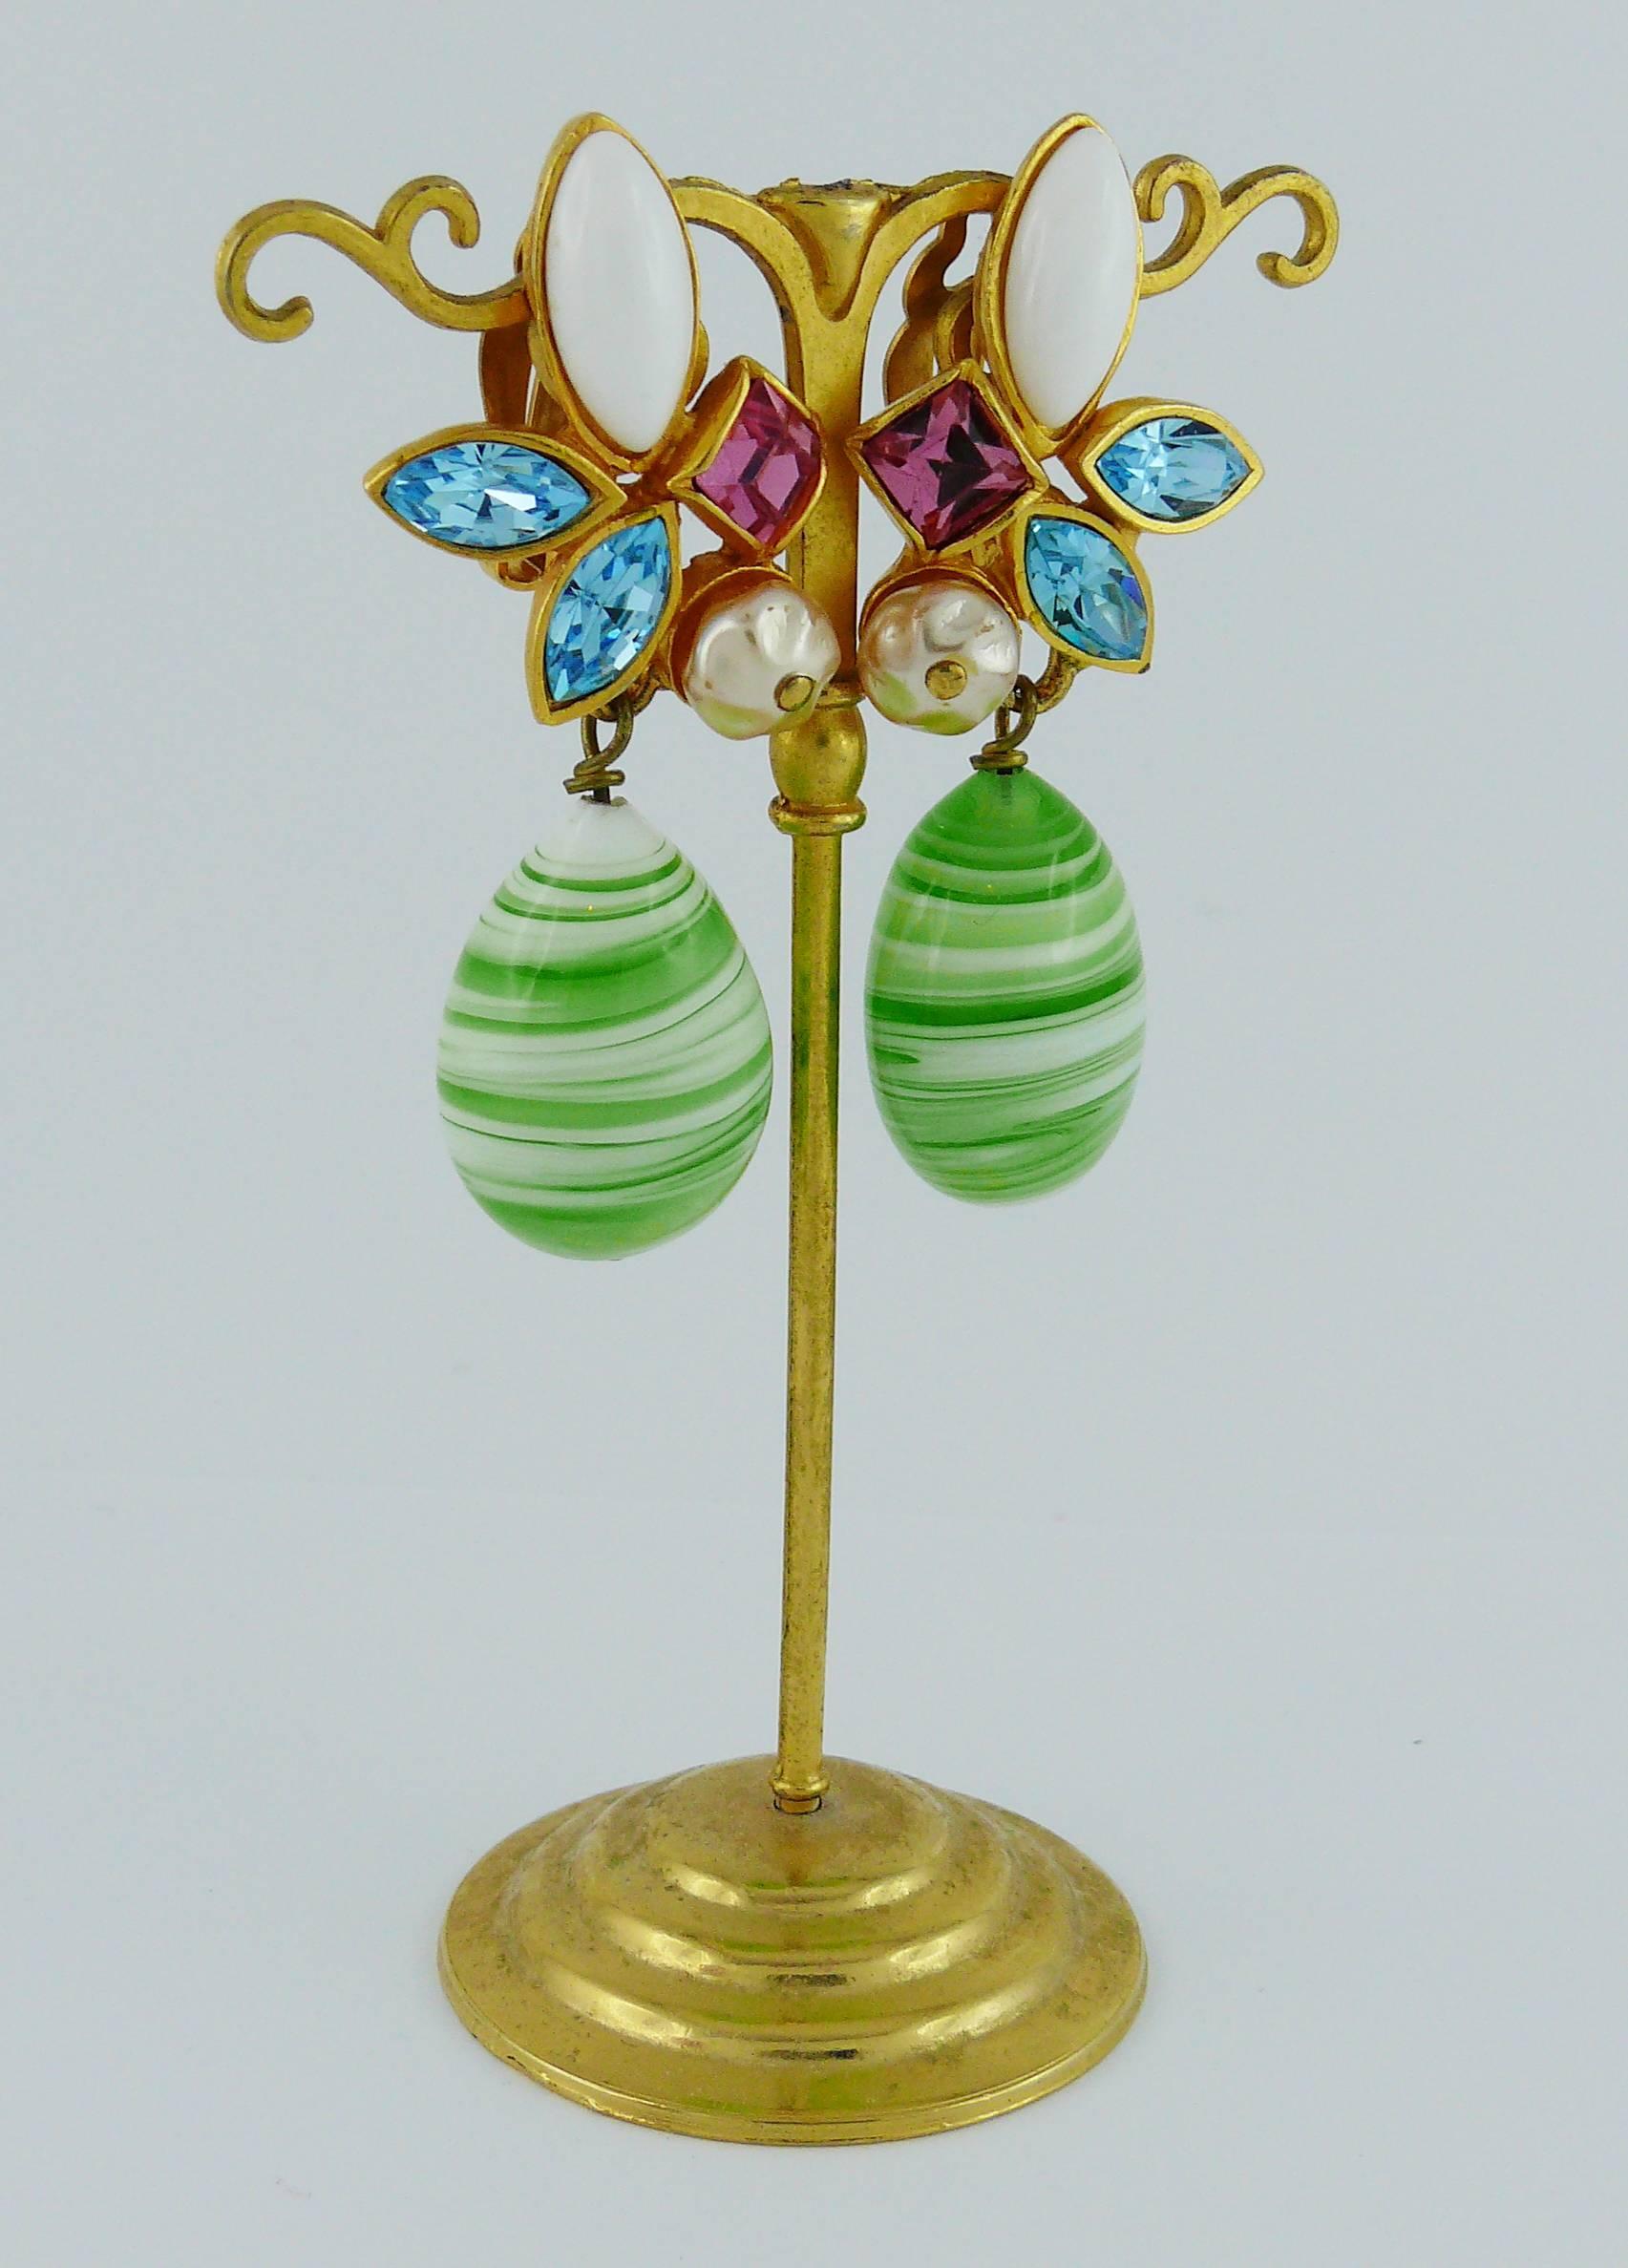 CHRISTIAN LACROIX vintage dangling earrings (clip-on) embellished with multicolored crystals, glass cabochon, faux pearl and a large pate de verre drop.

Marked CHRISTIAN LACROIX CL Made in France.

Indicative measurements : length approx. 5.2 cm